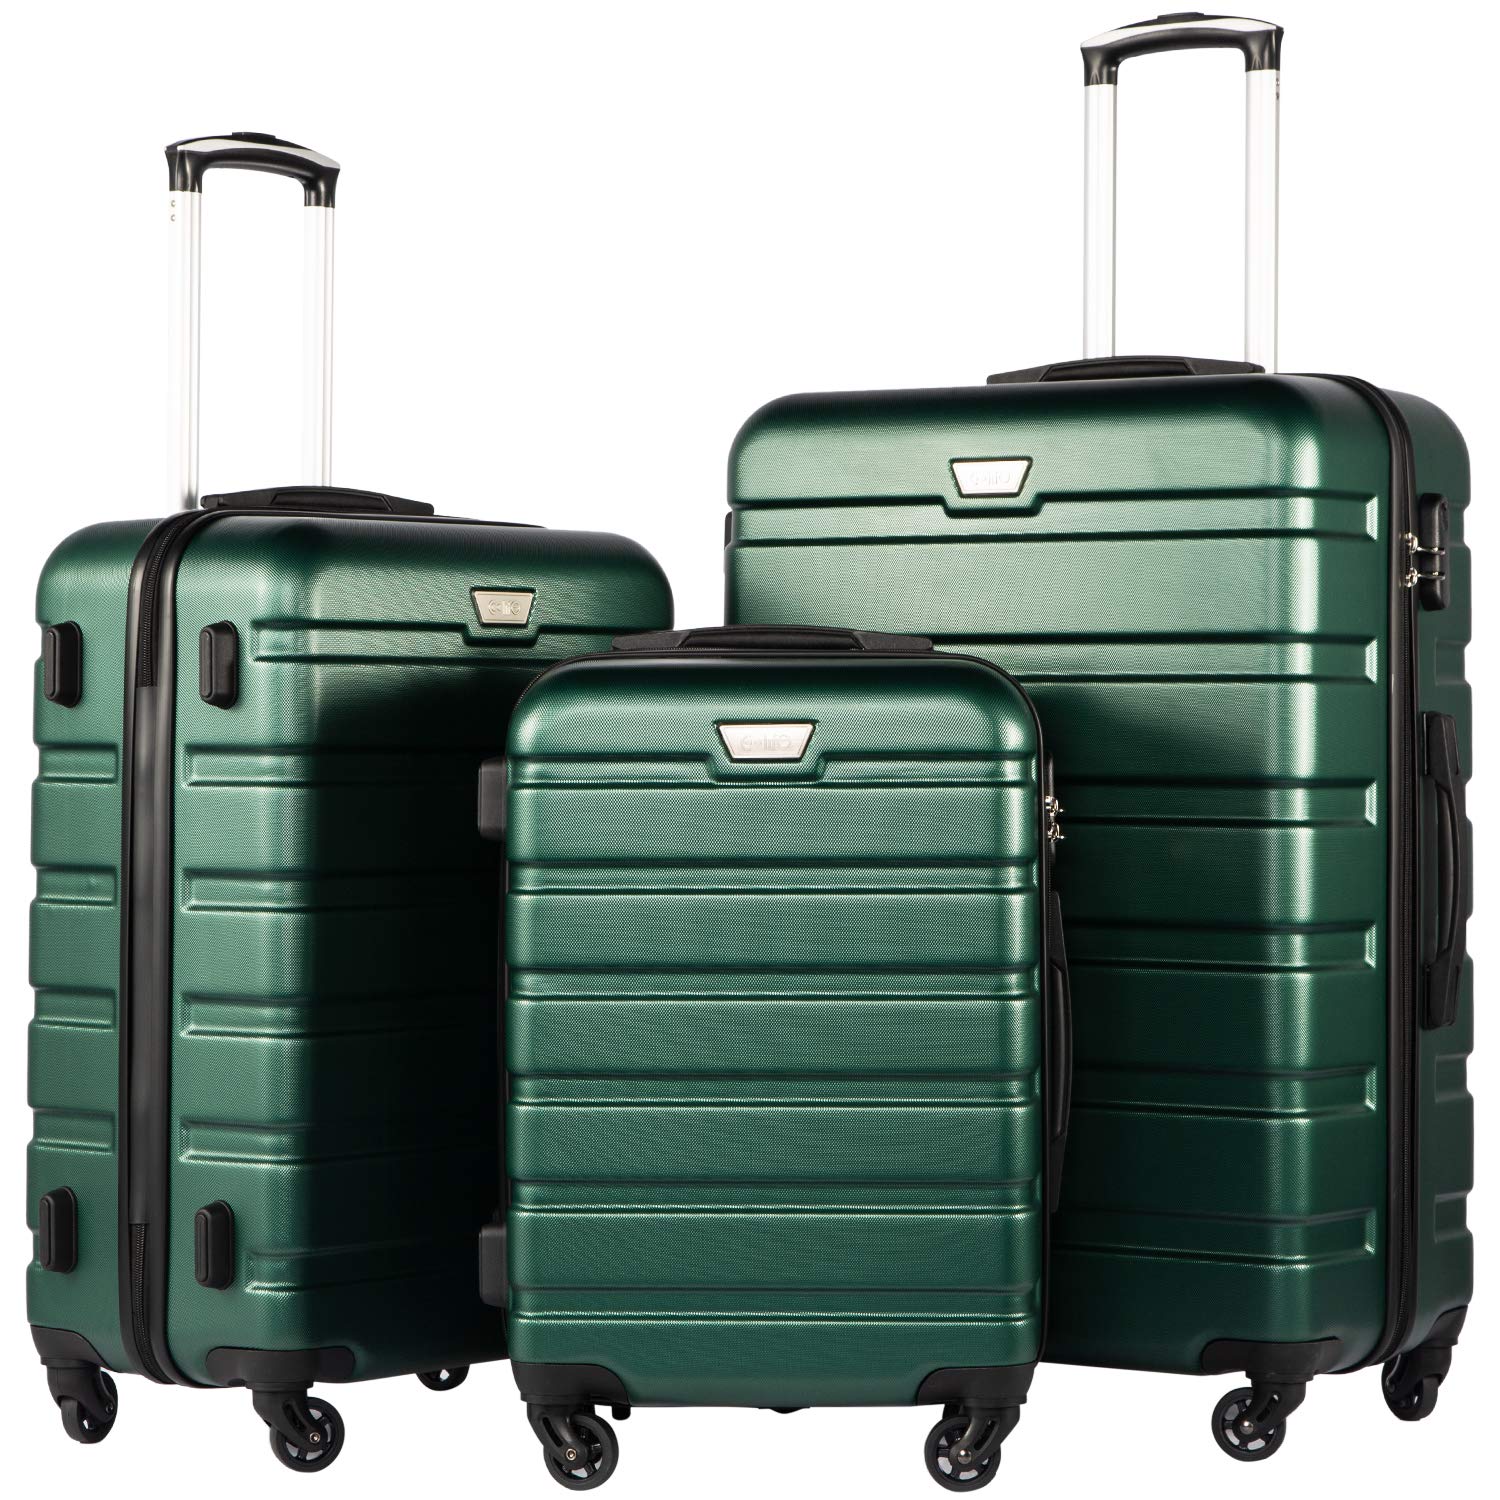 Ifly Hardside Fibertech Luggage 28 inch Checked Luggage, Forest Green